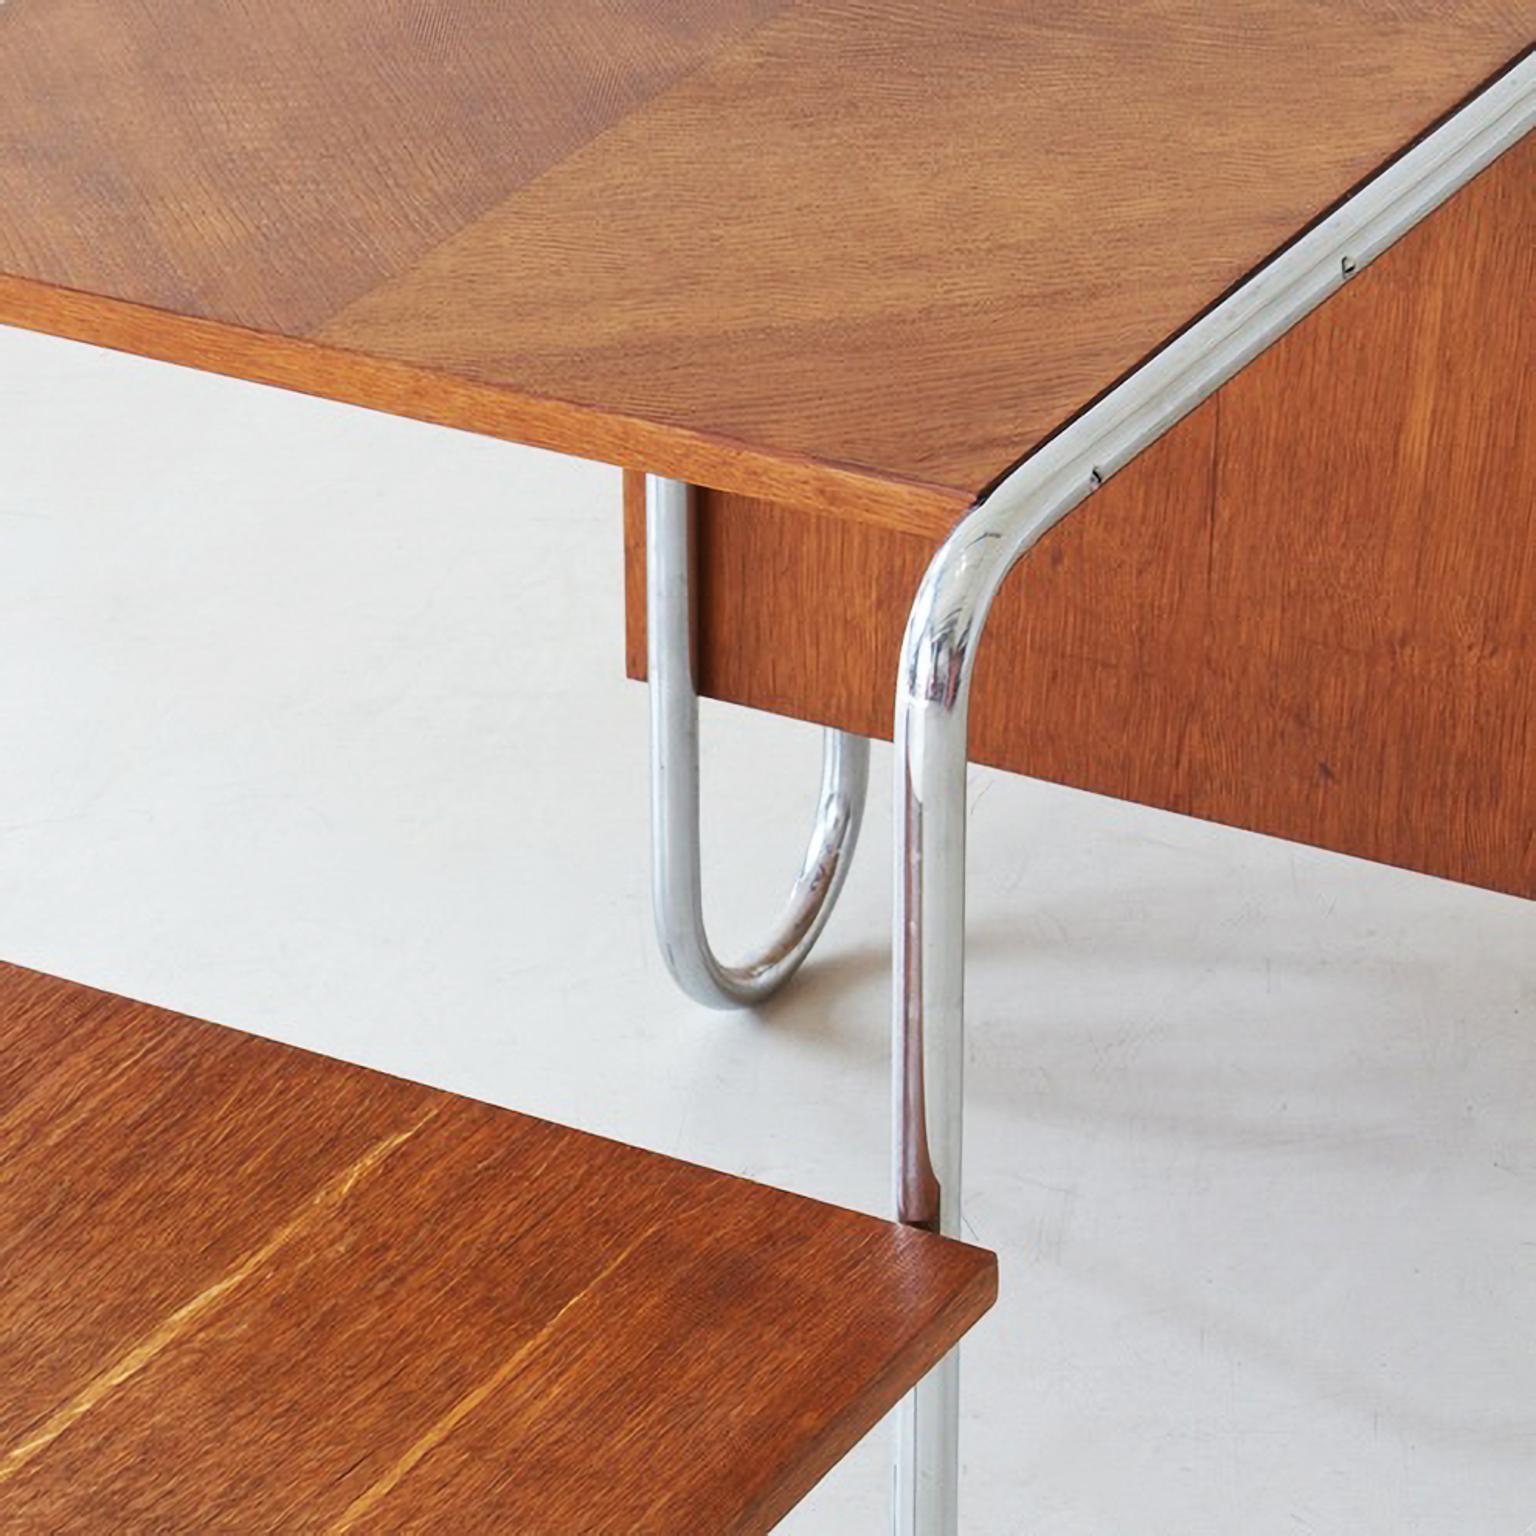 Bauhaus Tubular Steel Desk by André Lurçat, Manufactured by Thonet, circa. 1935 For Sale 1